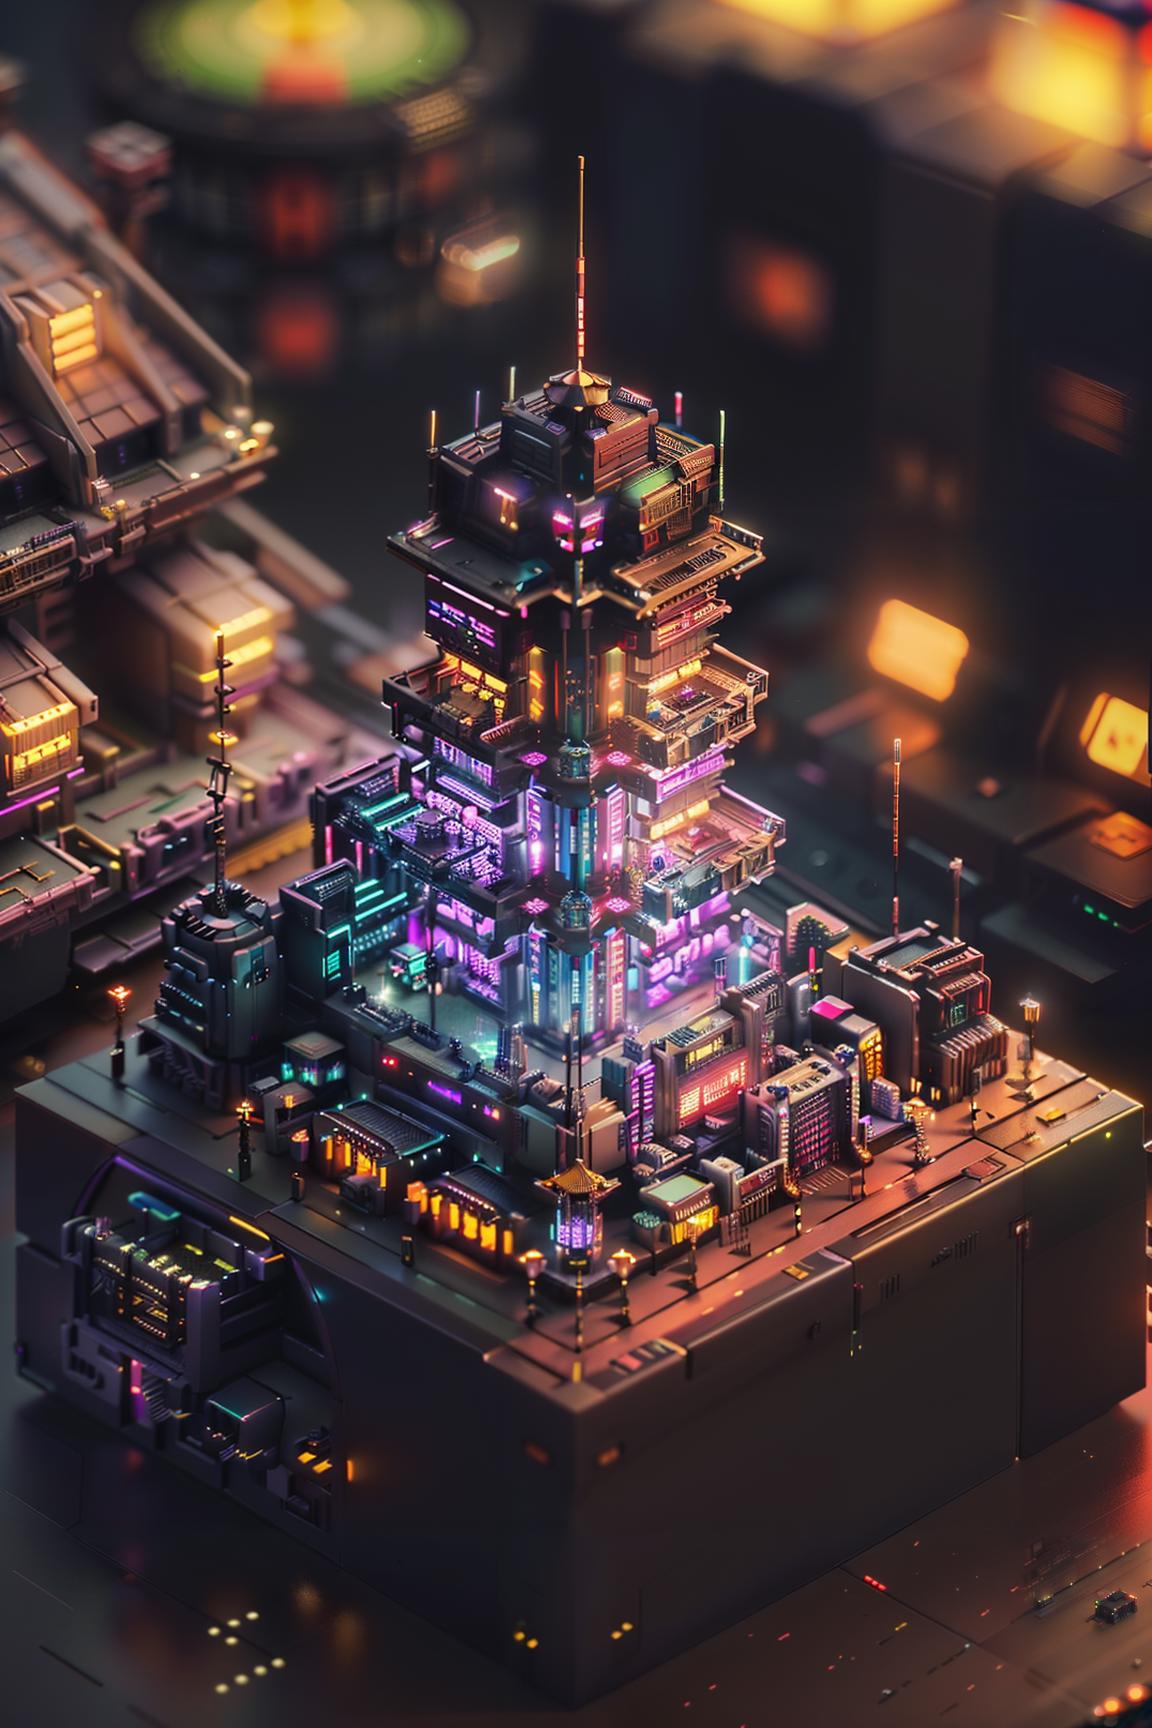 Computer-generated 3D image of a futuristic city skyline with a large tower at the center, lit up with purple lights.